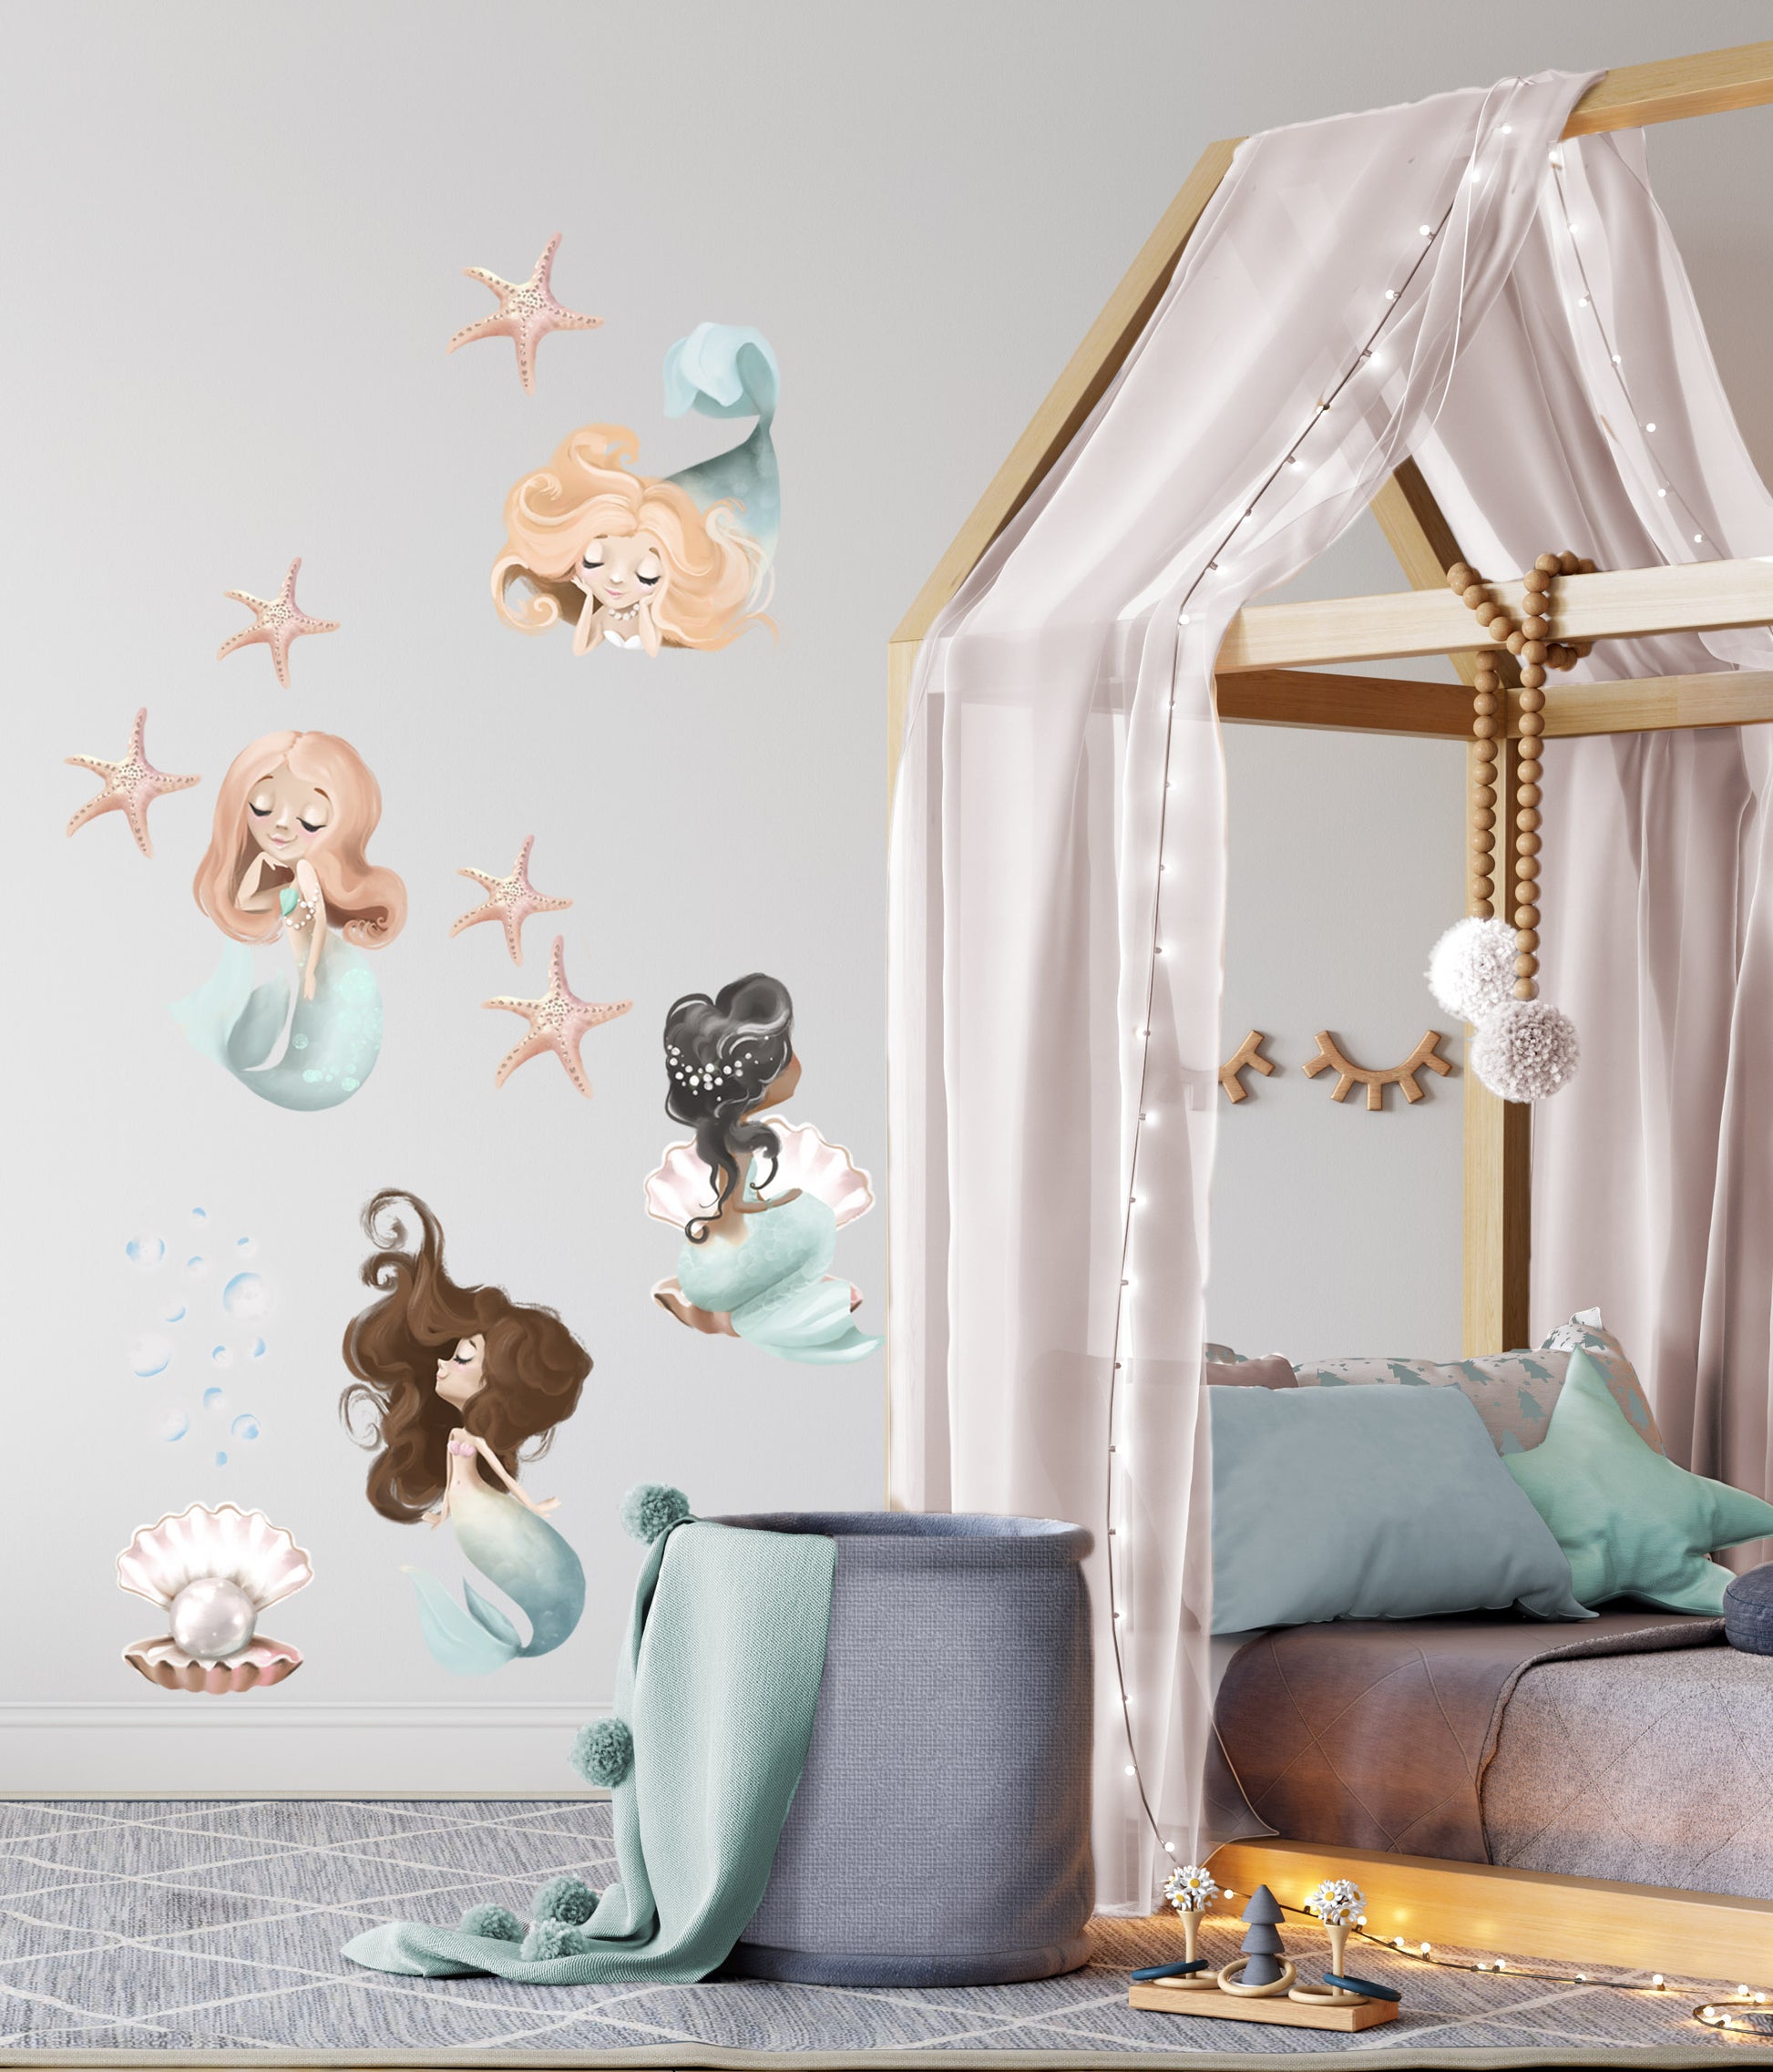 Mermaid Wall Decals (Seafoam) - Wall Decals - Fable and Fawn 